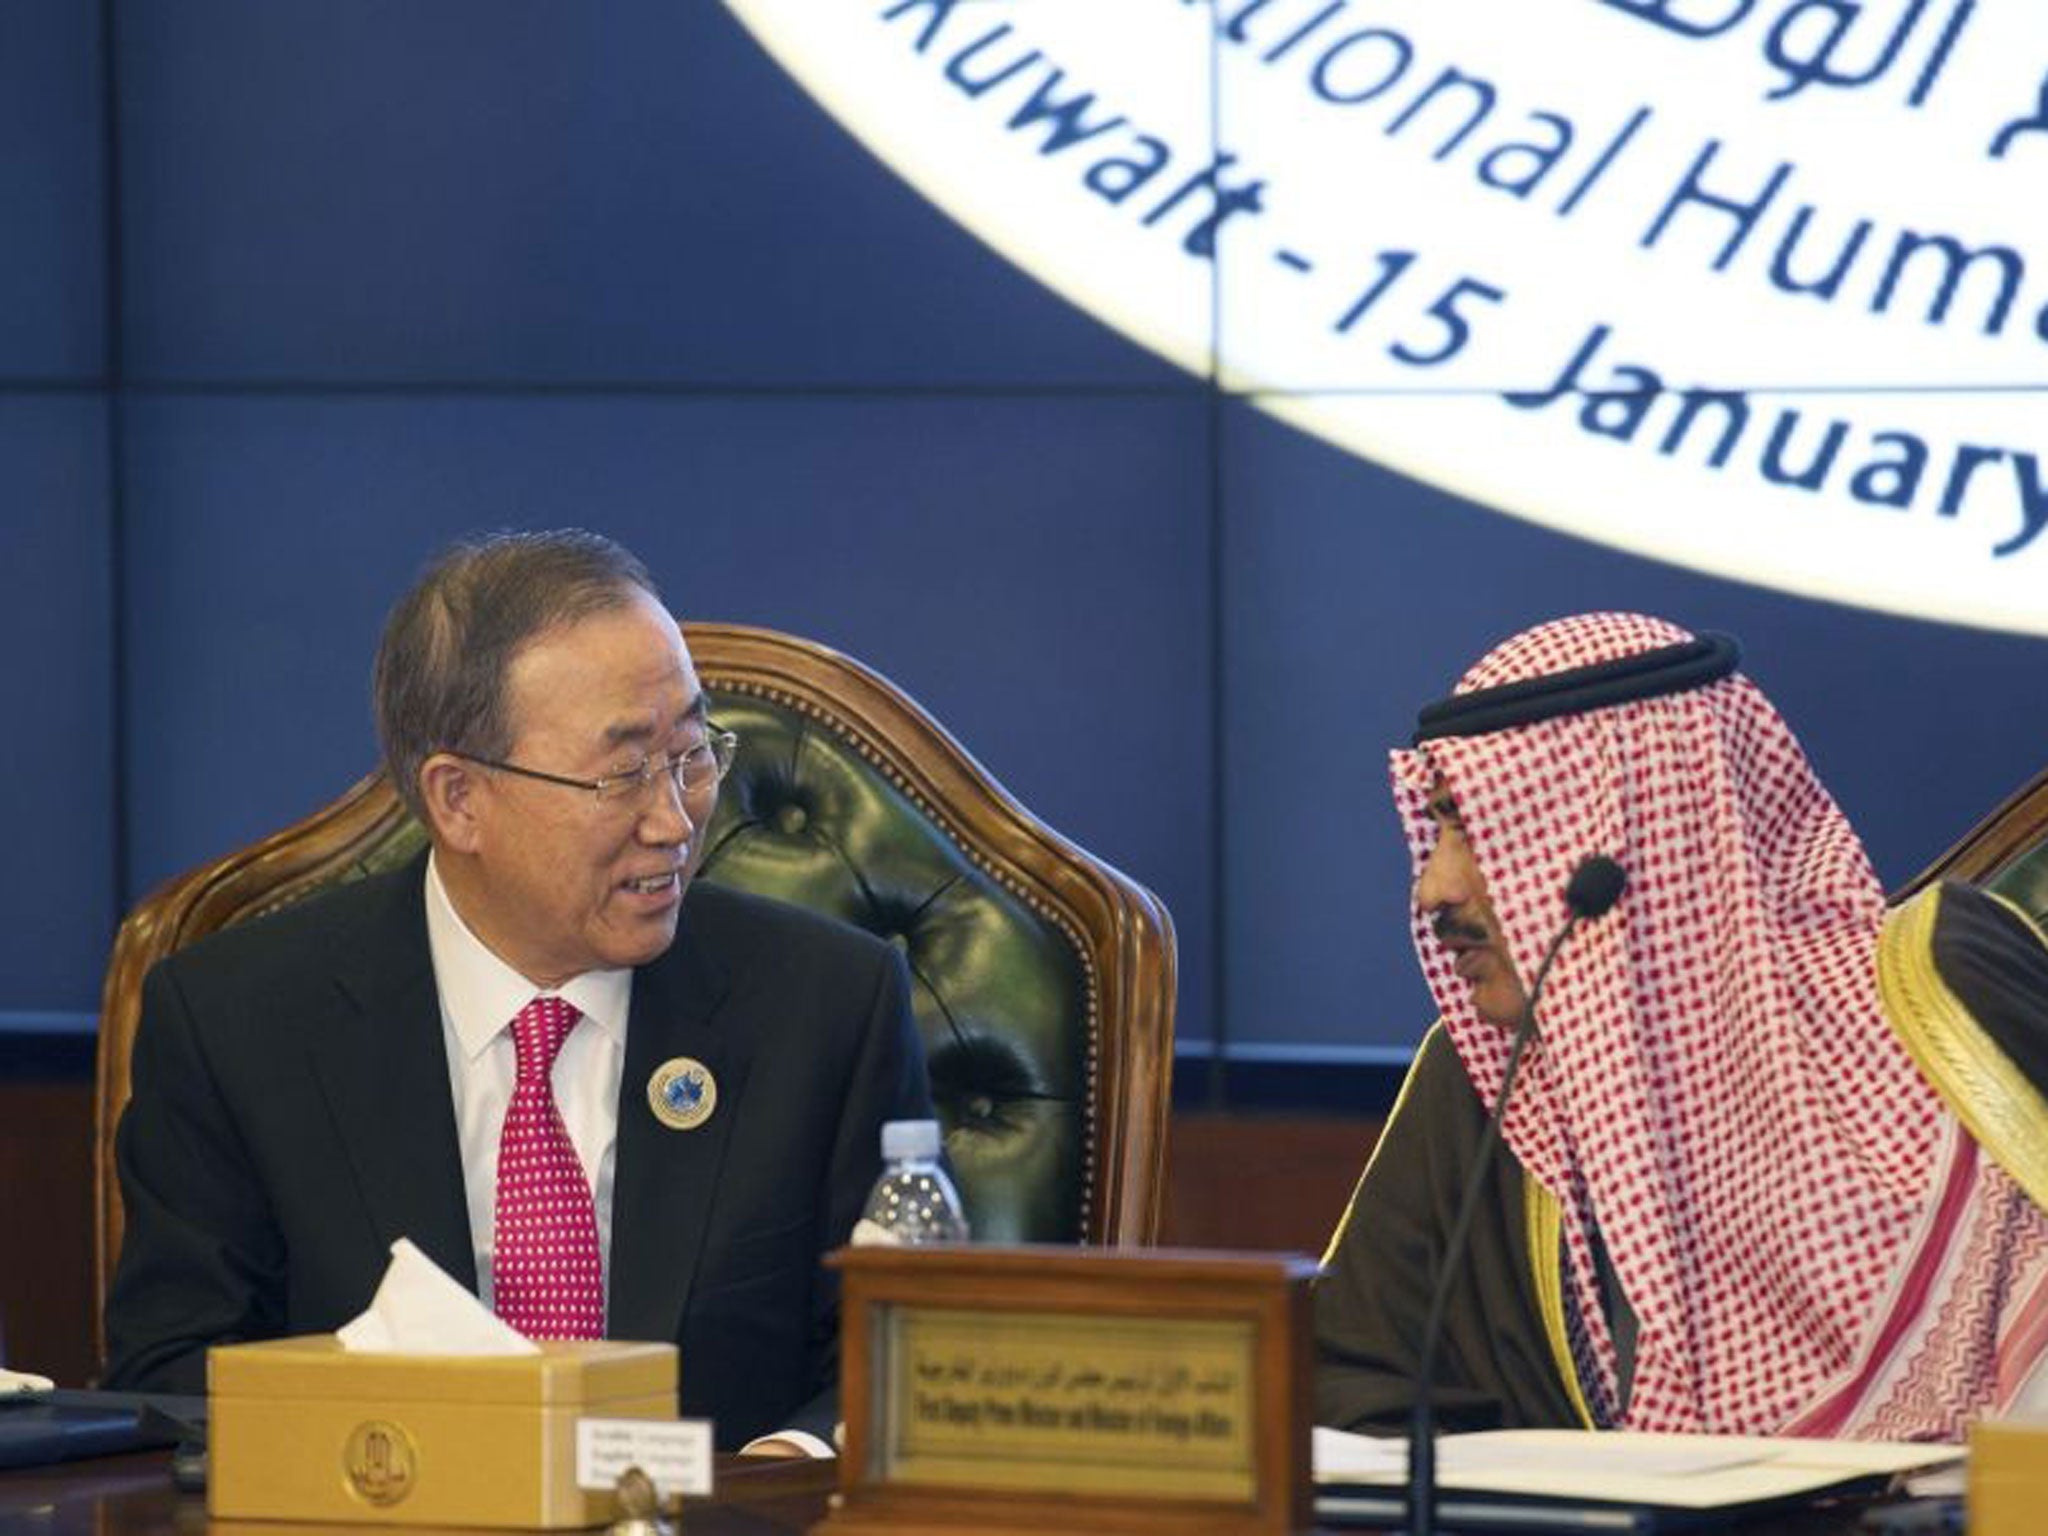 United Nations Secretary General Ban Ki-Moon talks to Kuwait's Minister of Foreign Affairs Sheikh Sabah alKhalid AlSabah at the end of the Second International Humanitarian Pledging Conference for Syria at Bayan Palace in Kuwait January 15, 2014